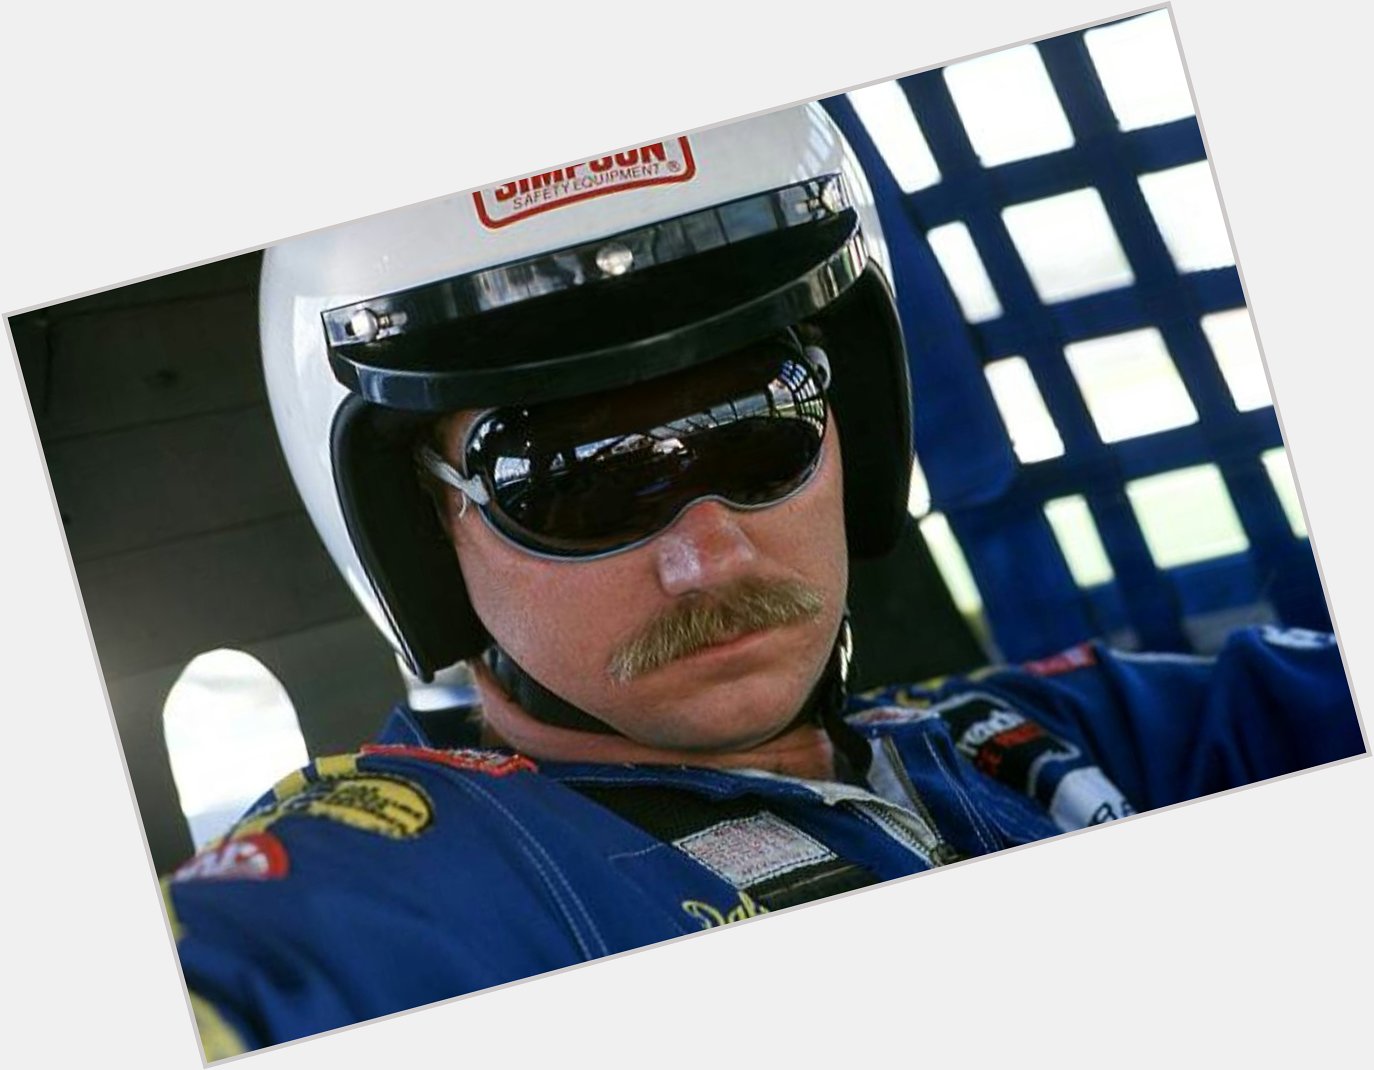 Happy Birthday Dale Earnhardt!
-22 Poles
-76 Wins -7 Champions -Likes to rattle Terry Labonte\s cage 